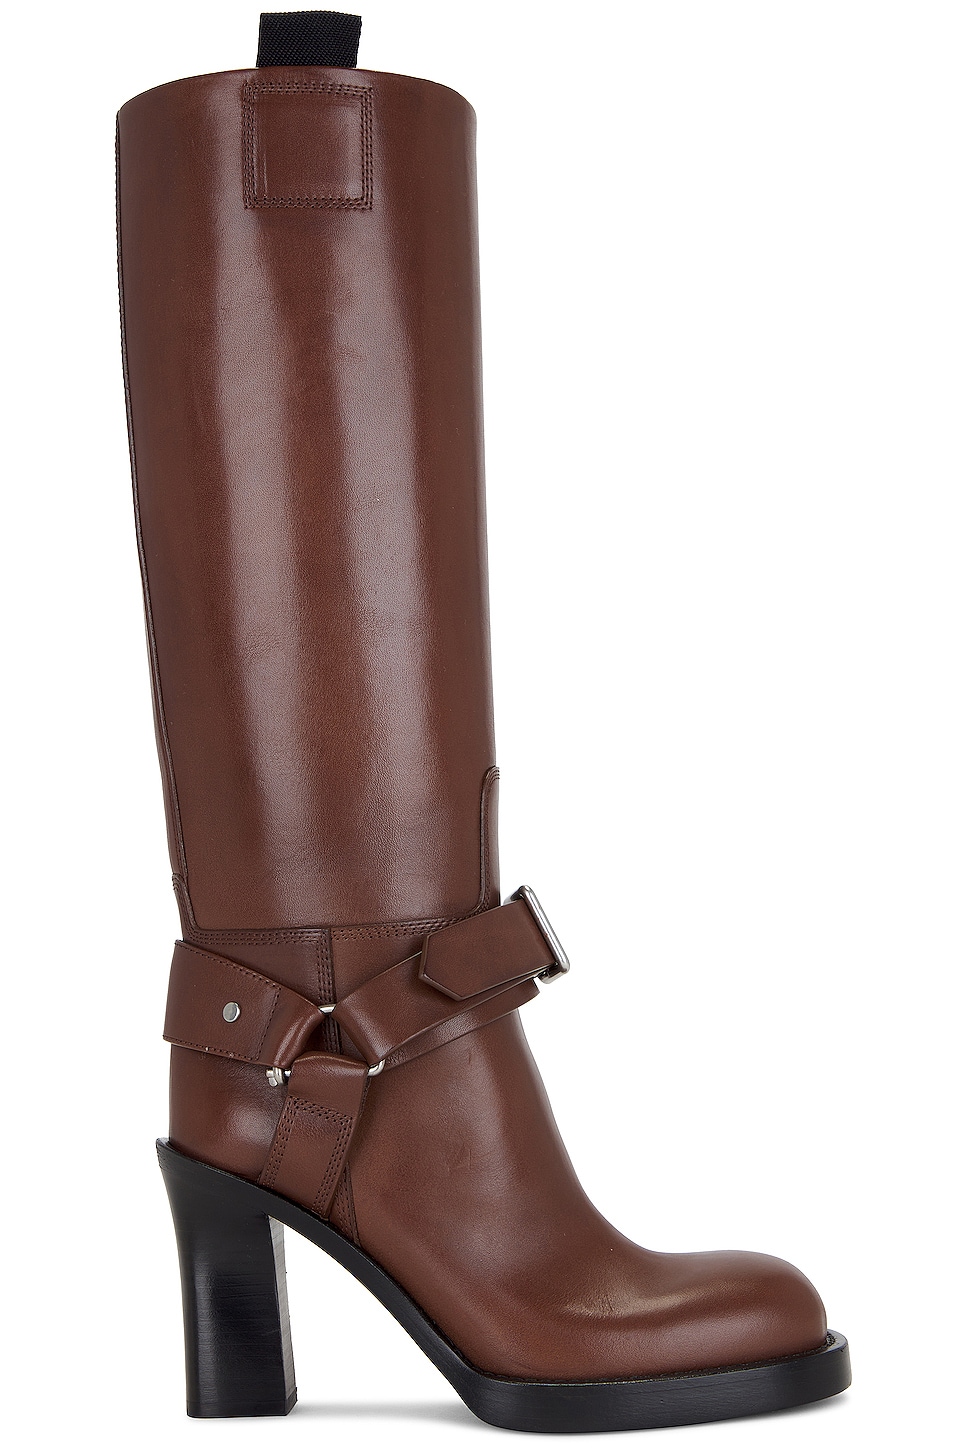 Image 1 of Burberry Stirrup High Boot in Walnut